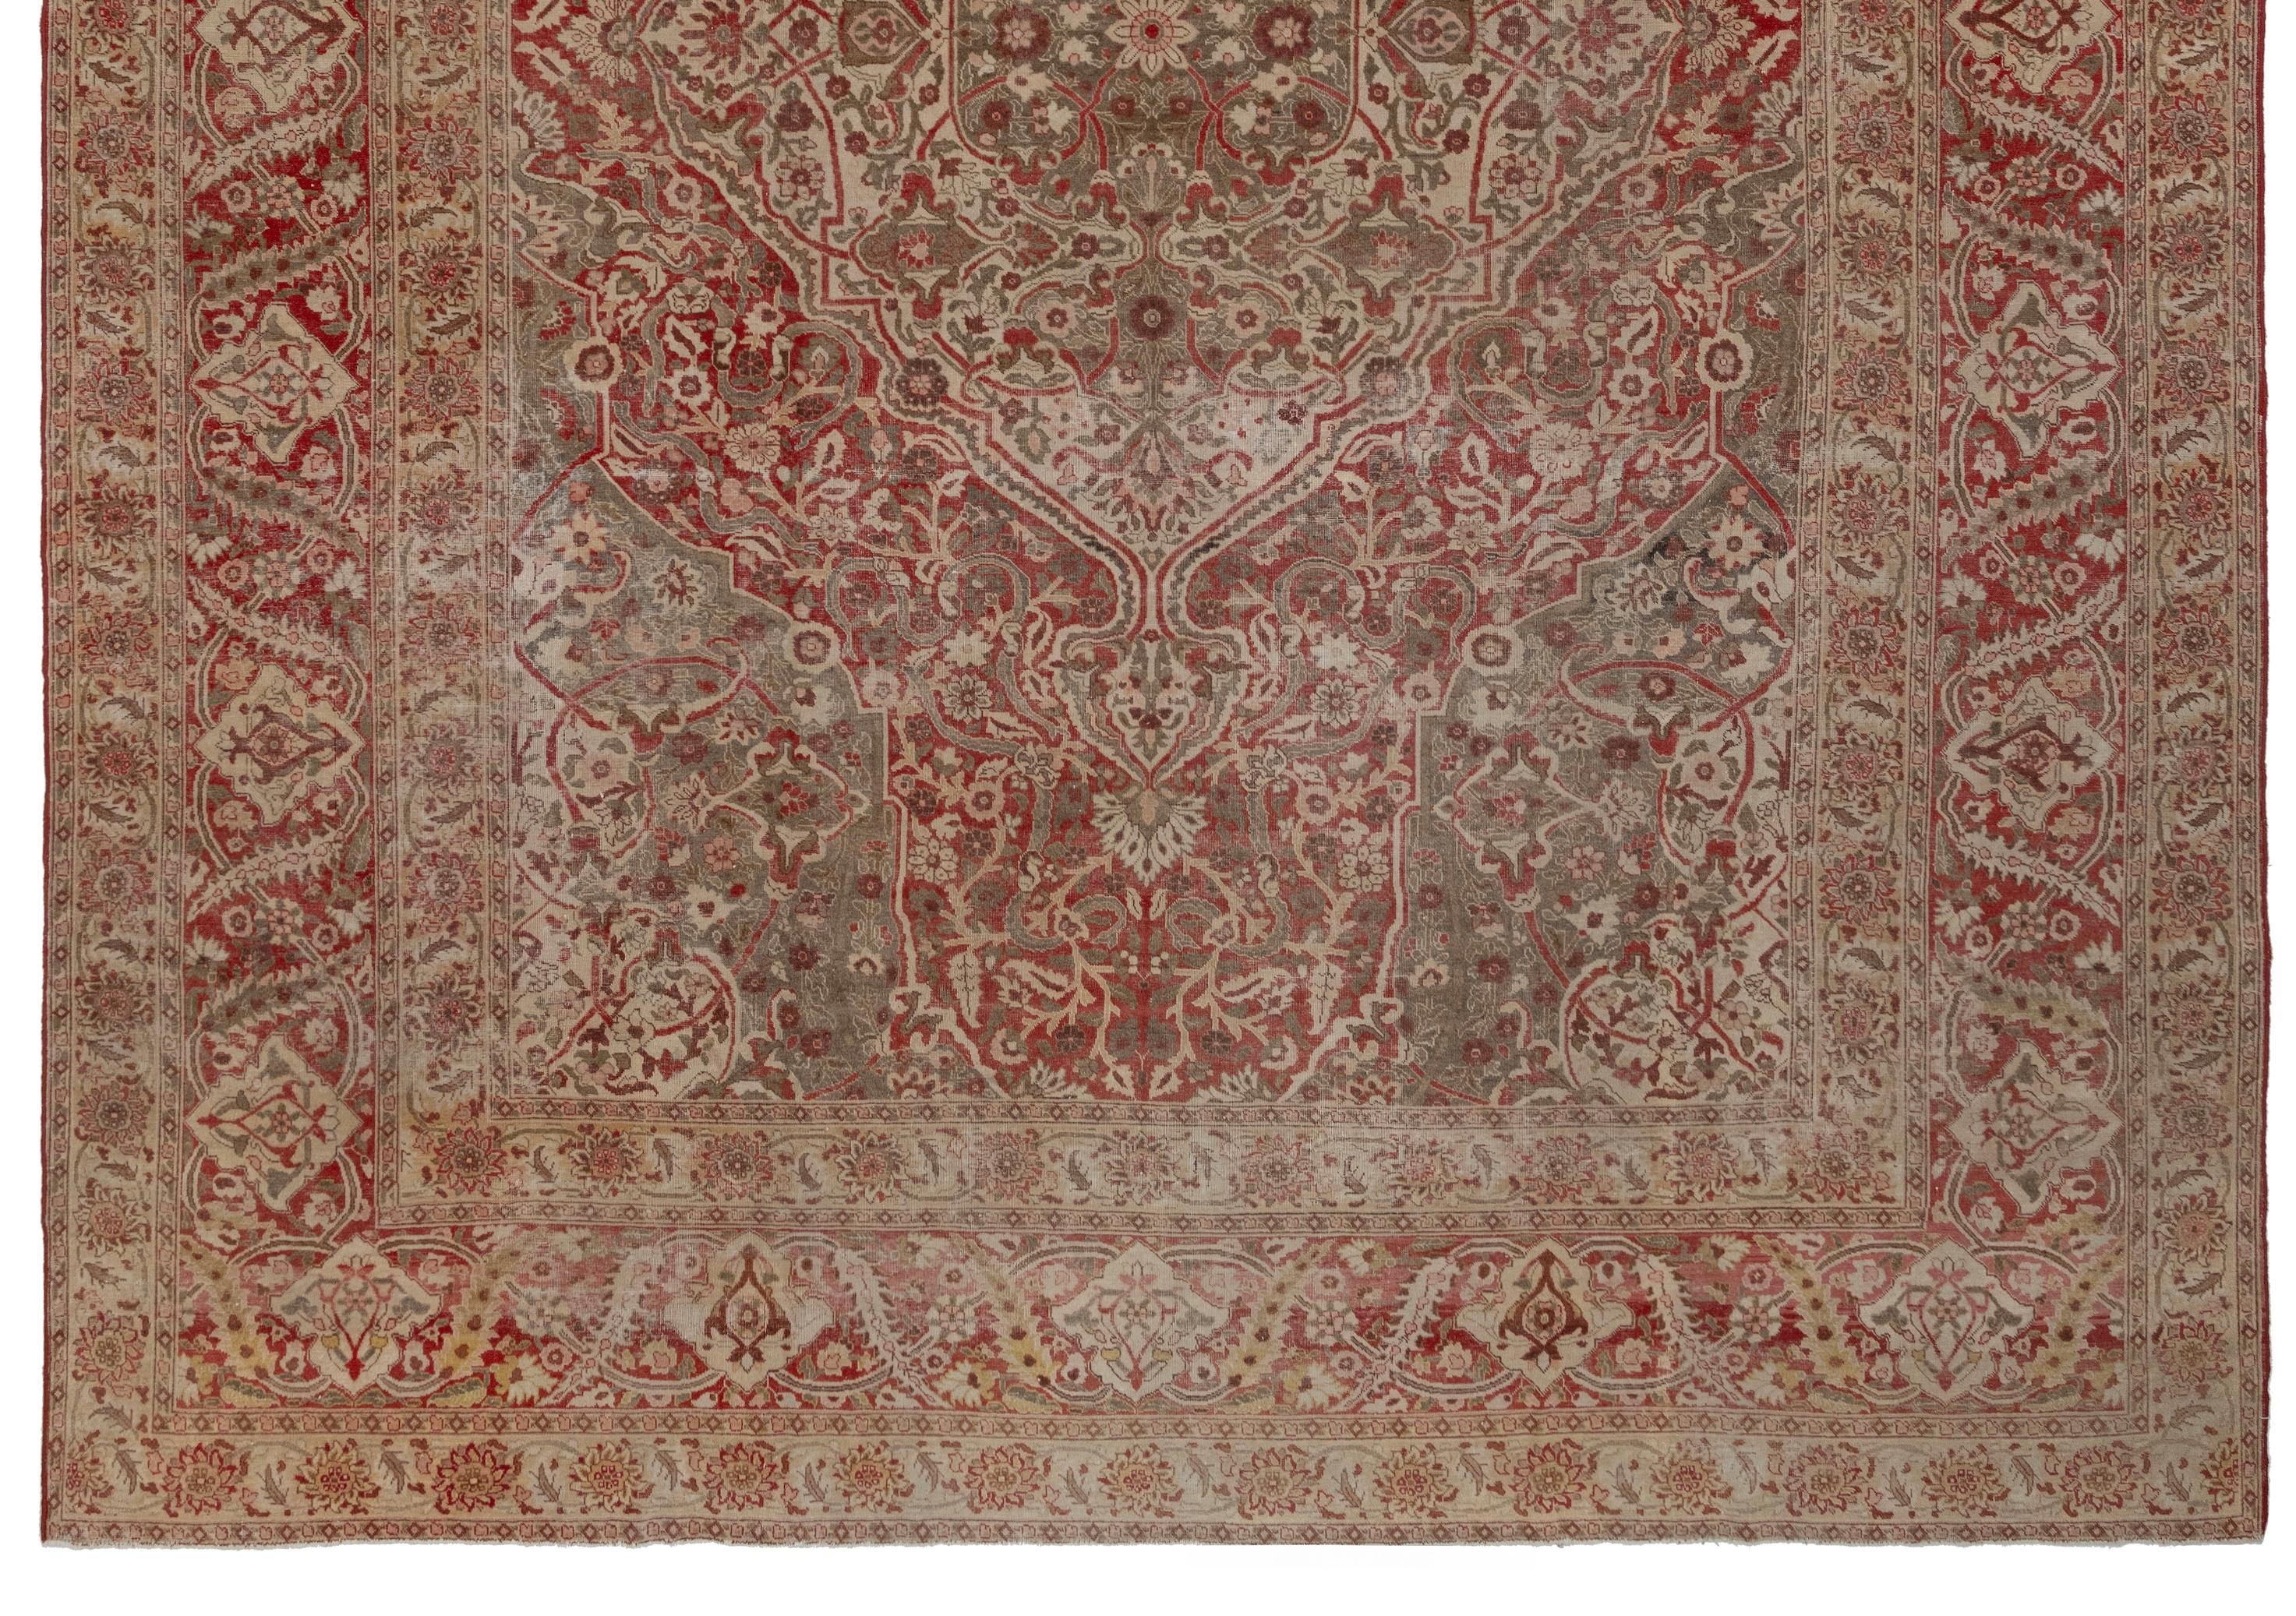 Tabriz is a city located in north west Iran and is known as a general category of Persian Rugs. These rugs played a significant role in the development of traditions and decorative arts in this region. Rug making is an art form passed on from